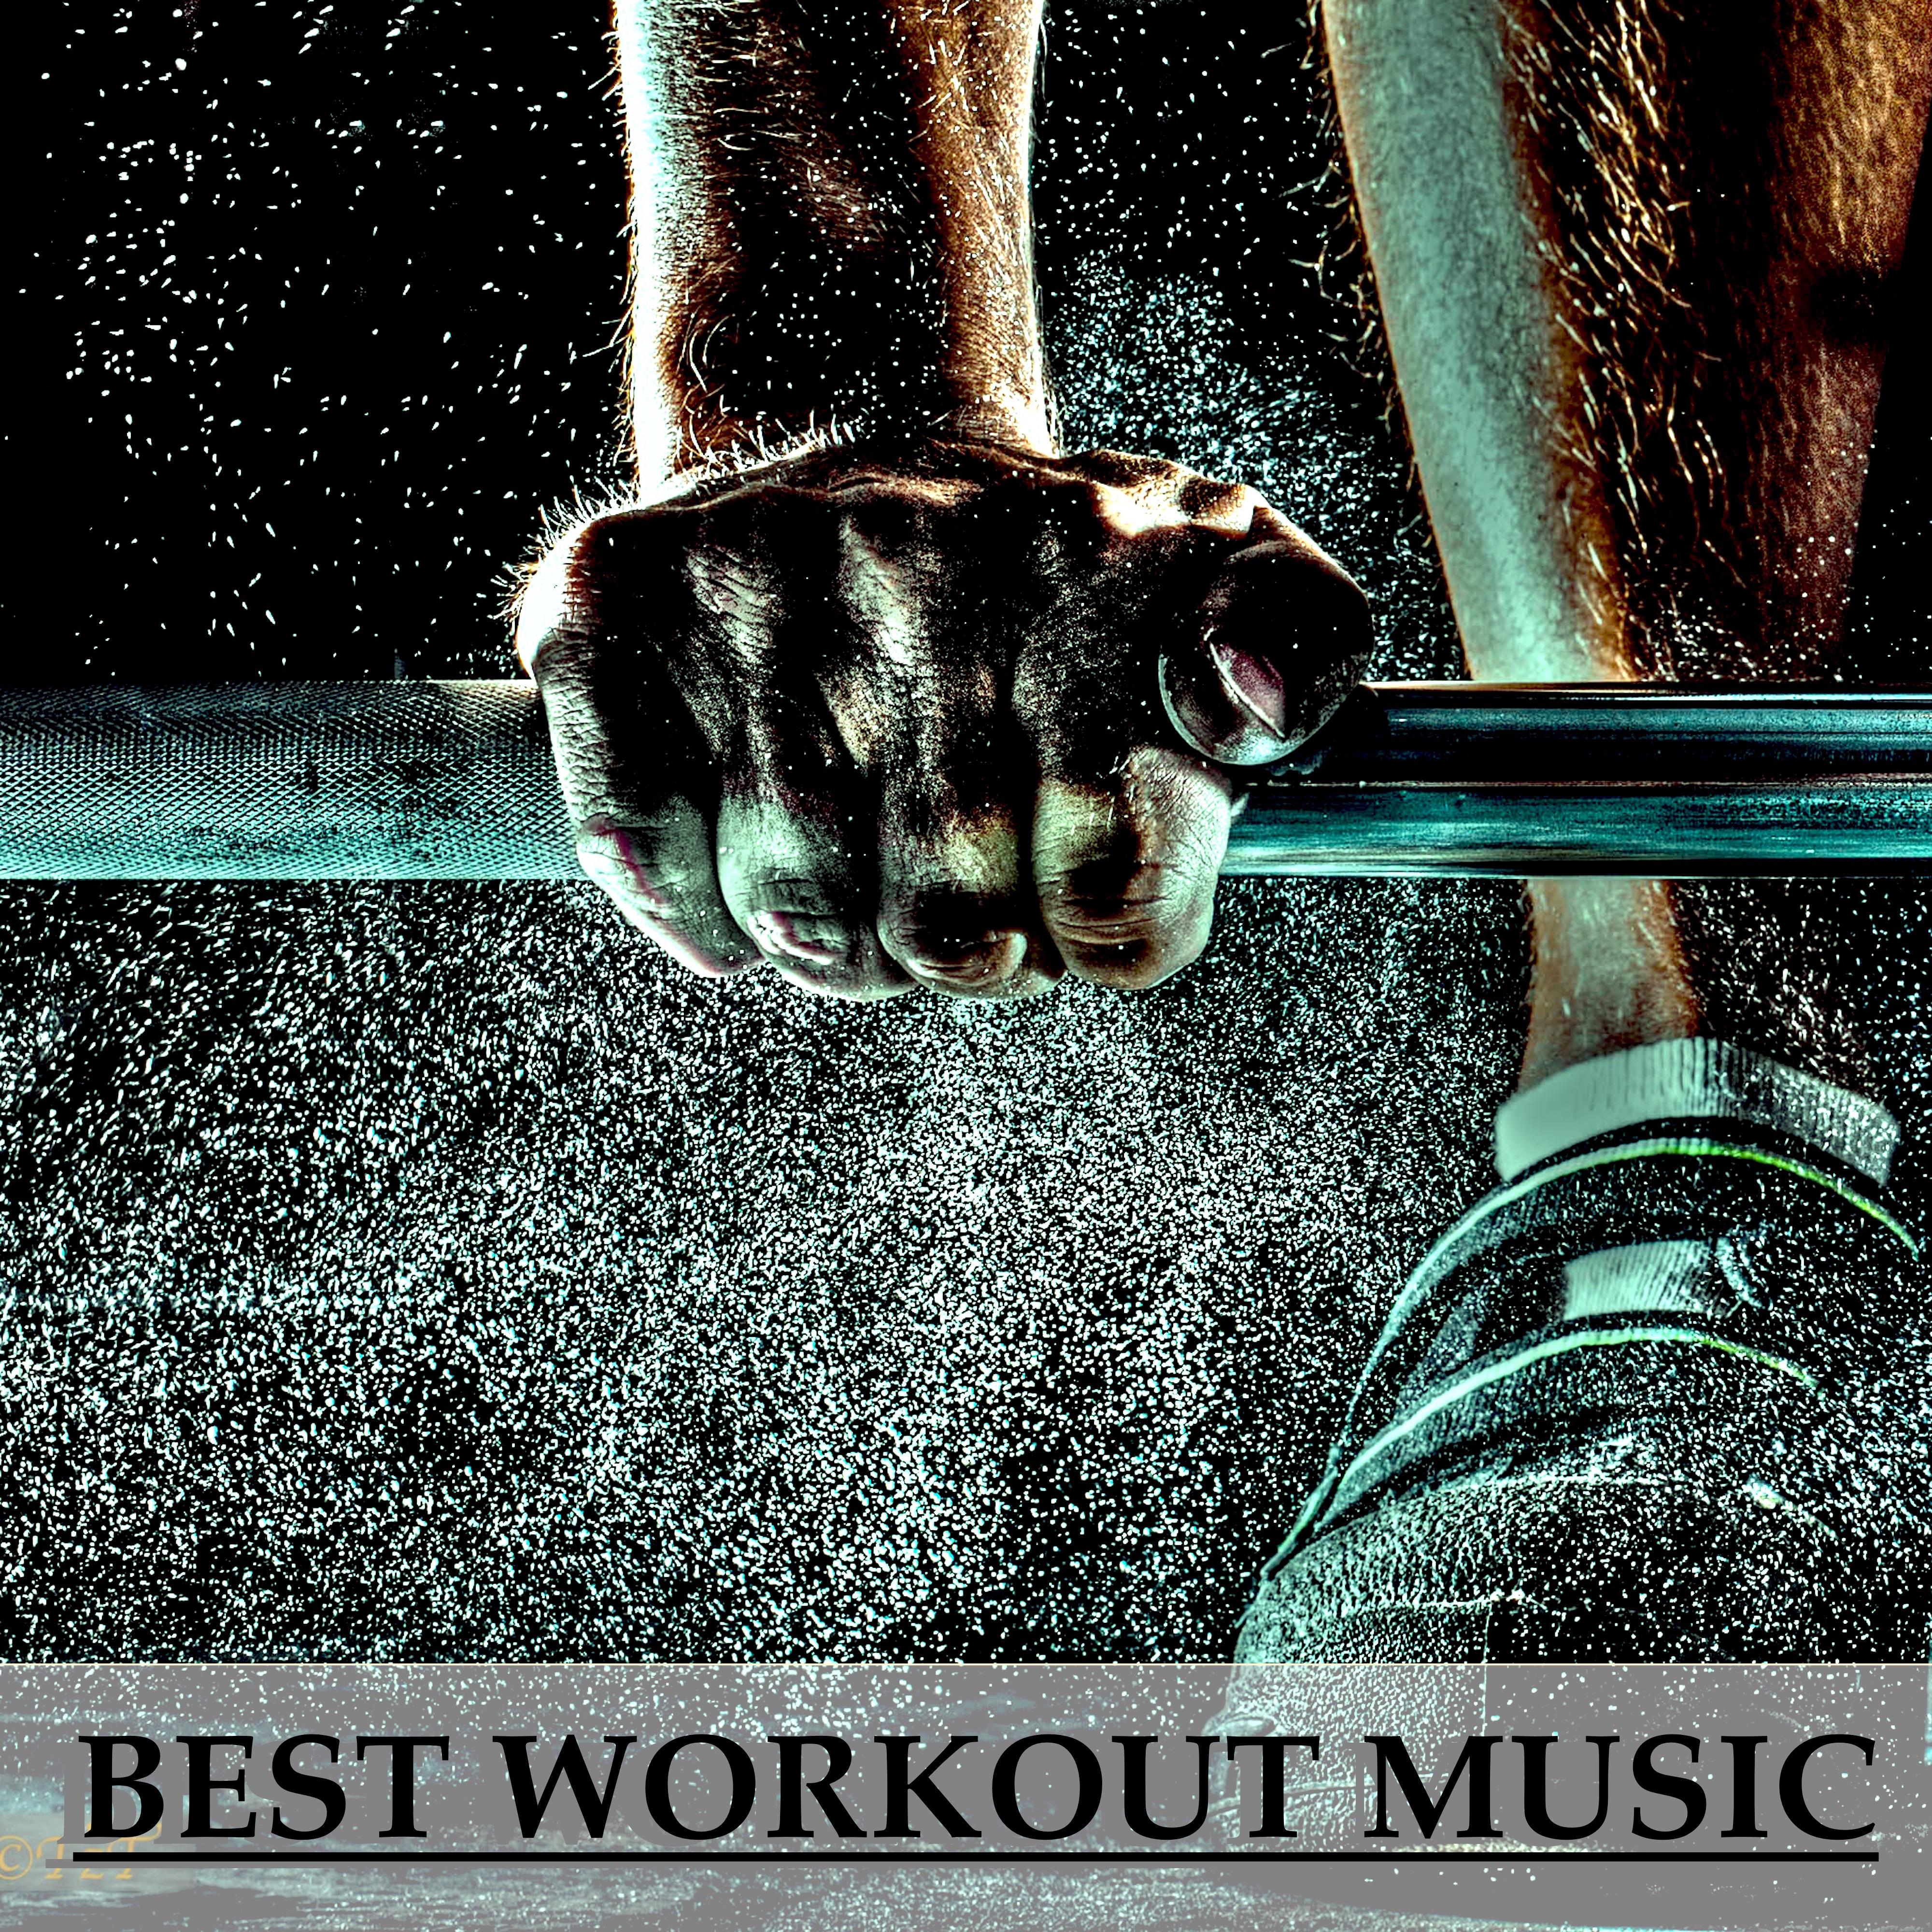 Workouts (Background Music)